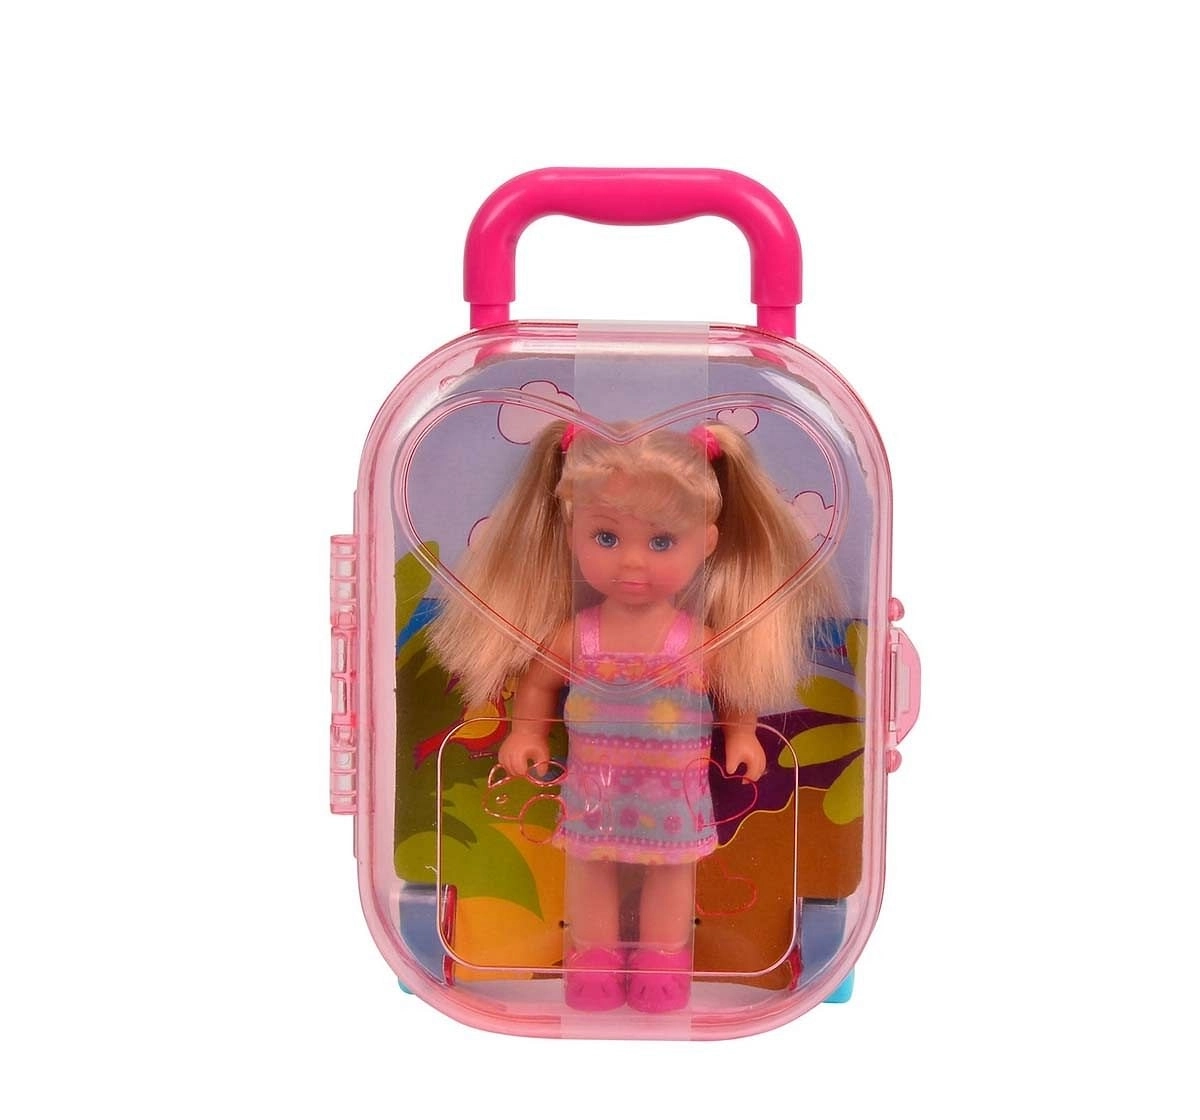 Simba - Steffi Love Evi Trolley 4 Assorted Dolls & Accessories for Kids Age 3Y+